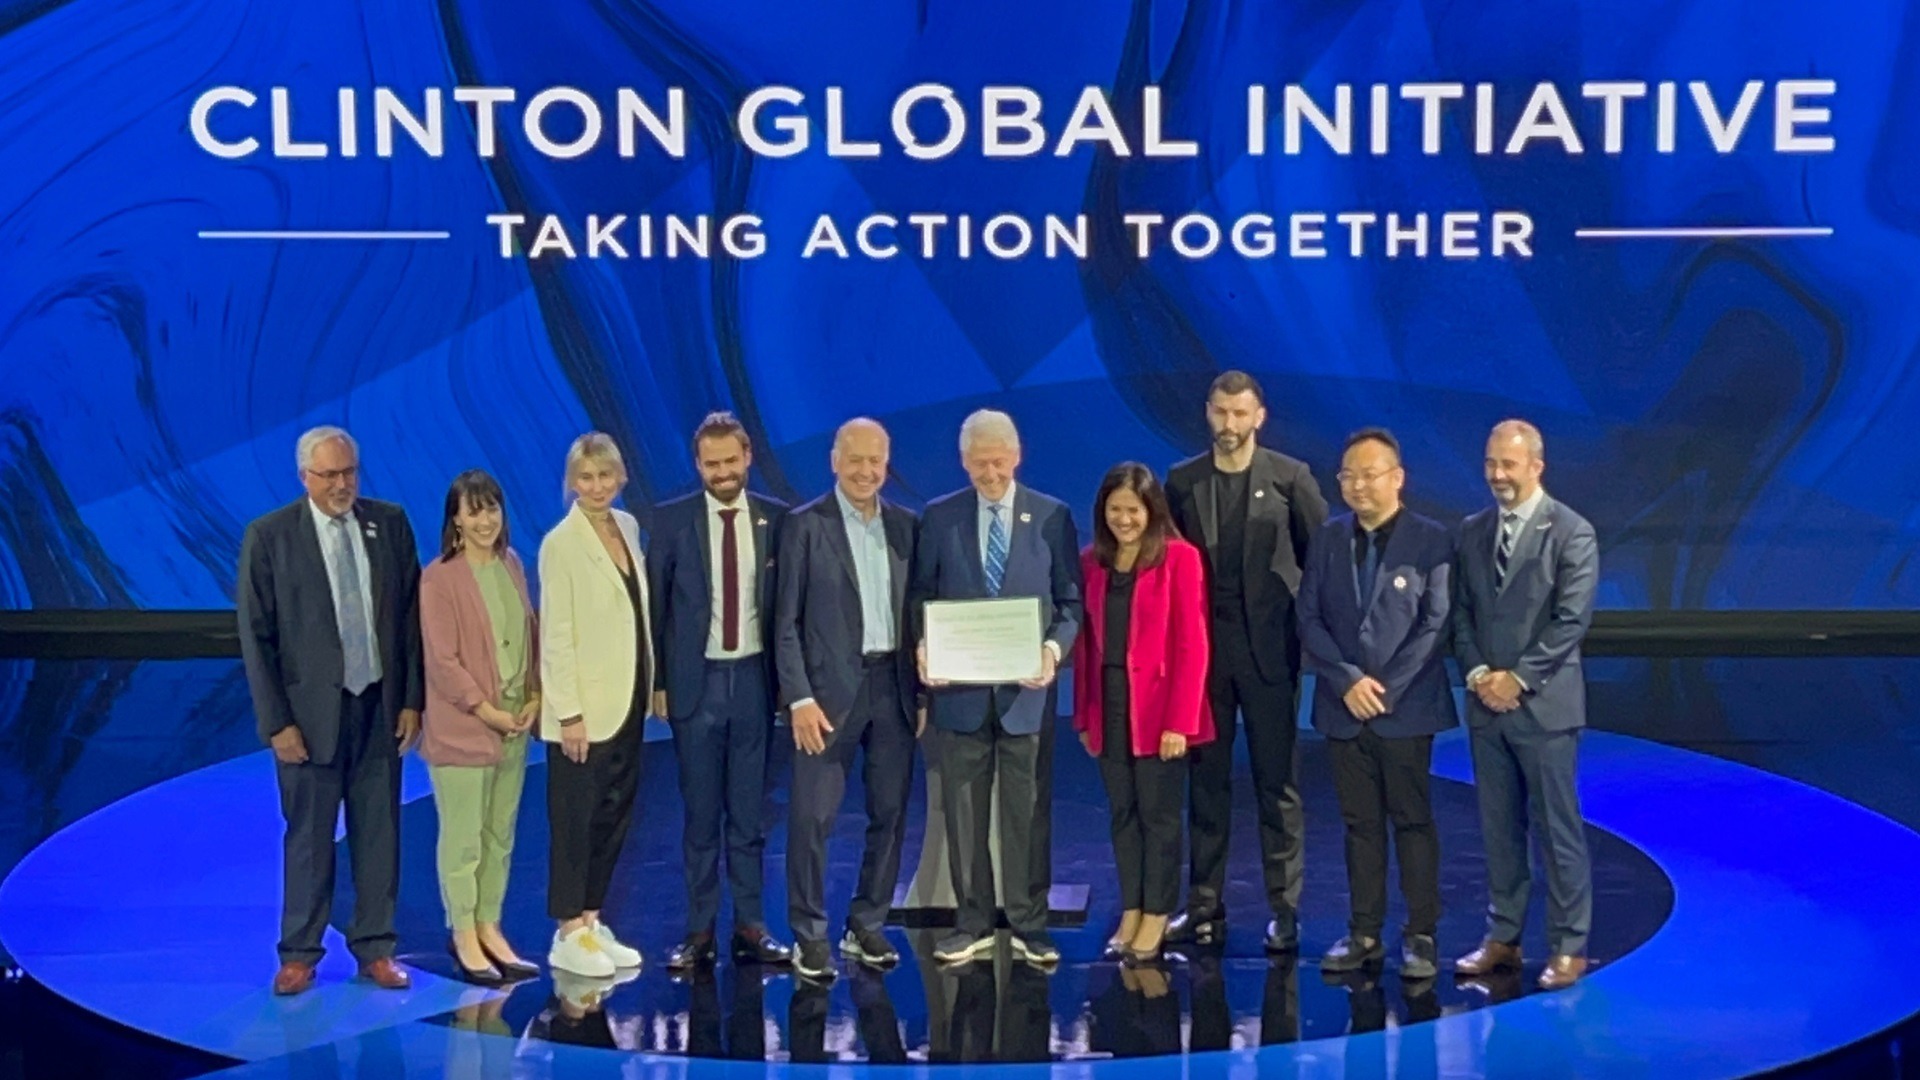 Global Public Investment Network (GPIN) makes commitment to action with Clinton Global Initiative